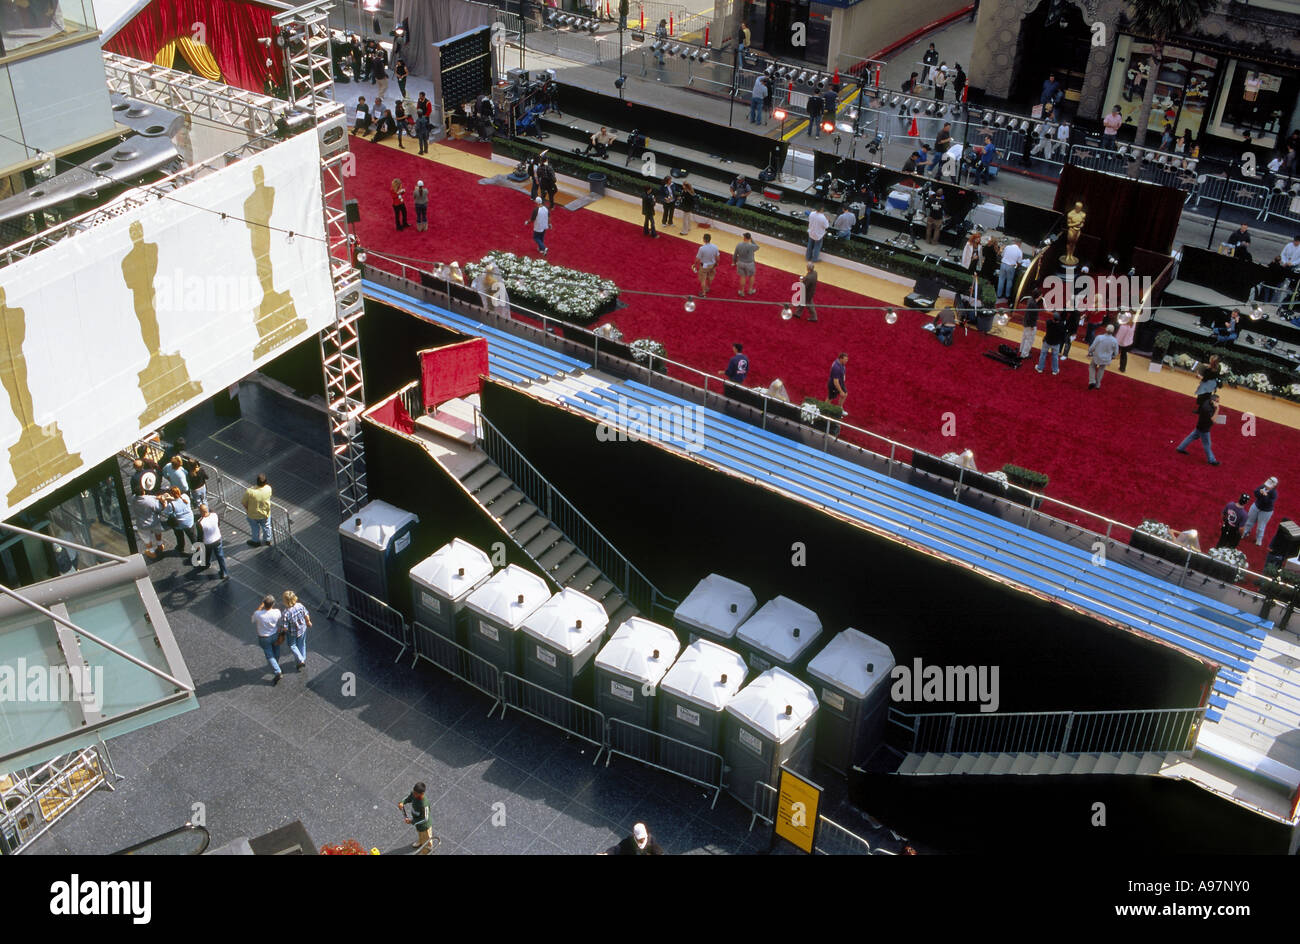 A view from above the red carpet on which stars will walk toward the Kodak Theatre for the Academy Awards ceremonies Stock Photo